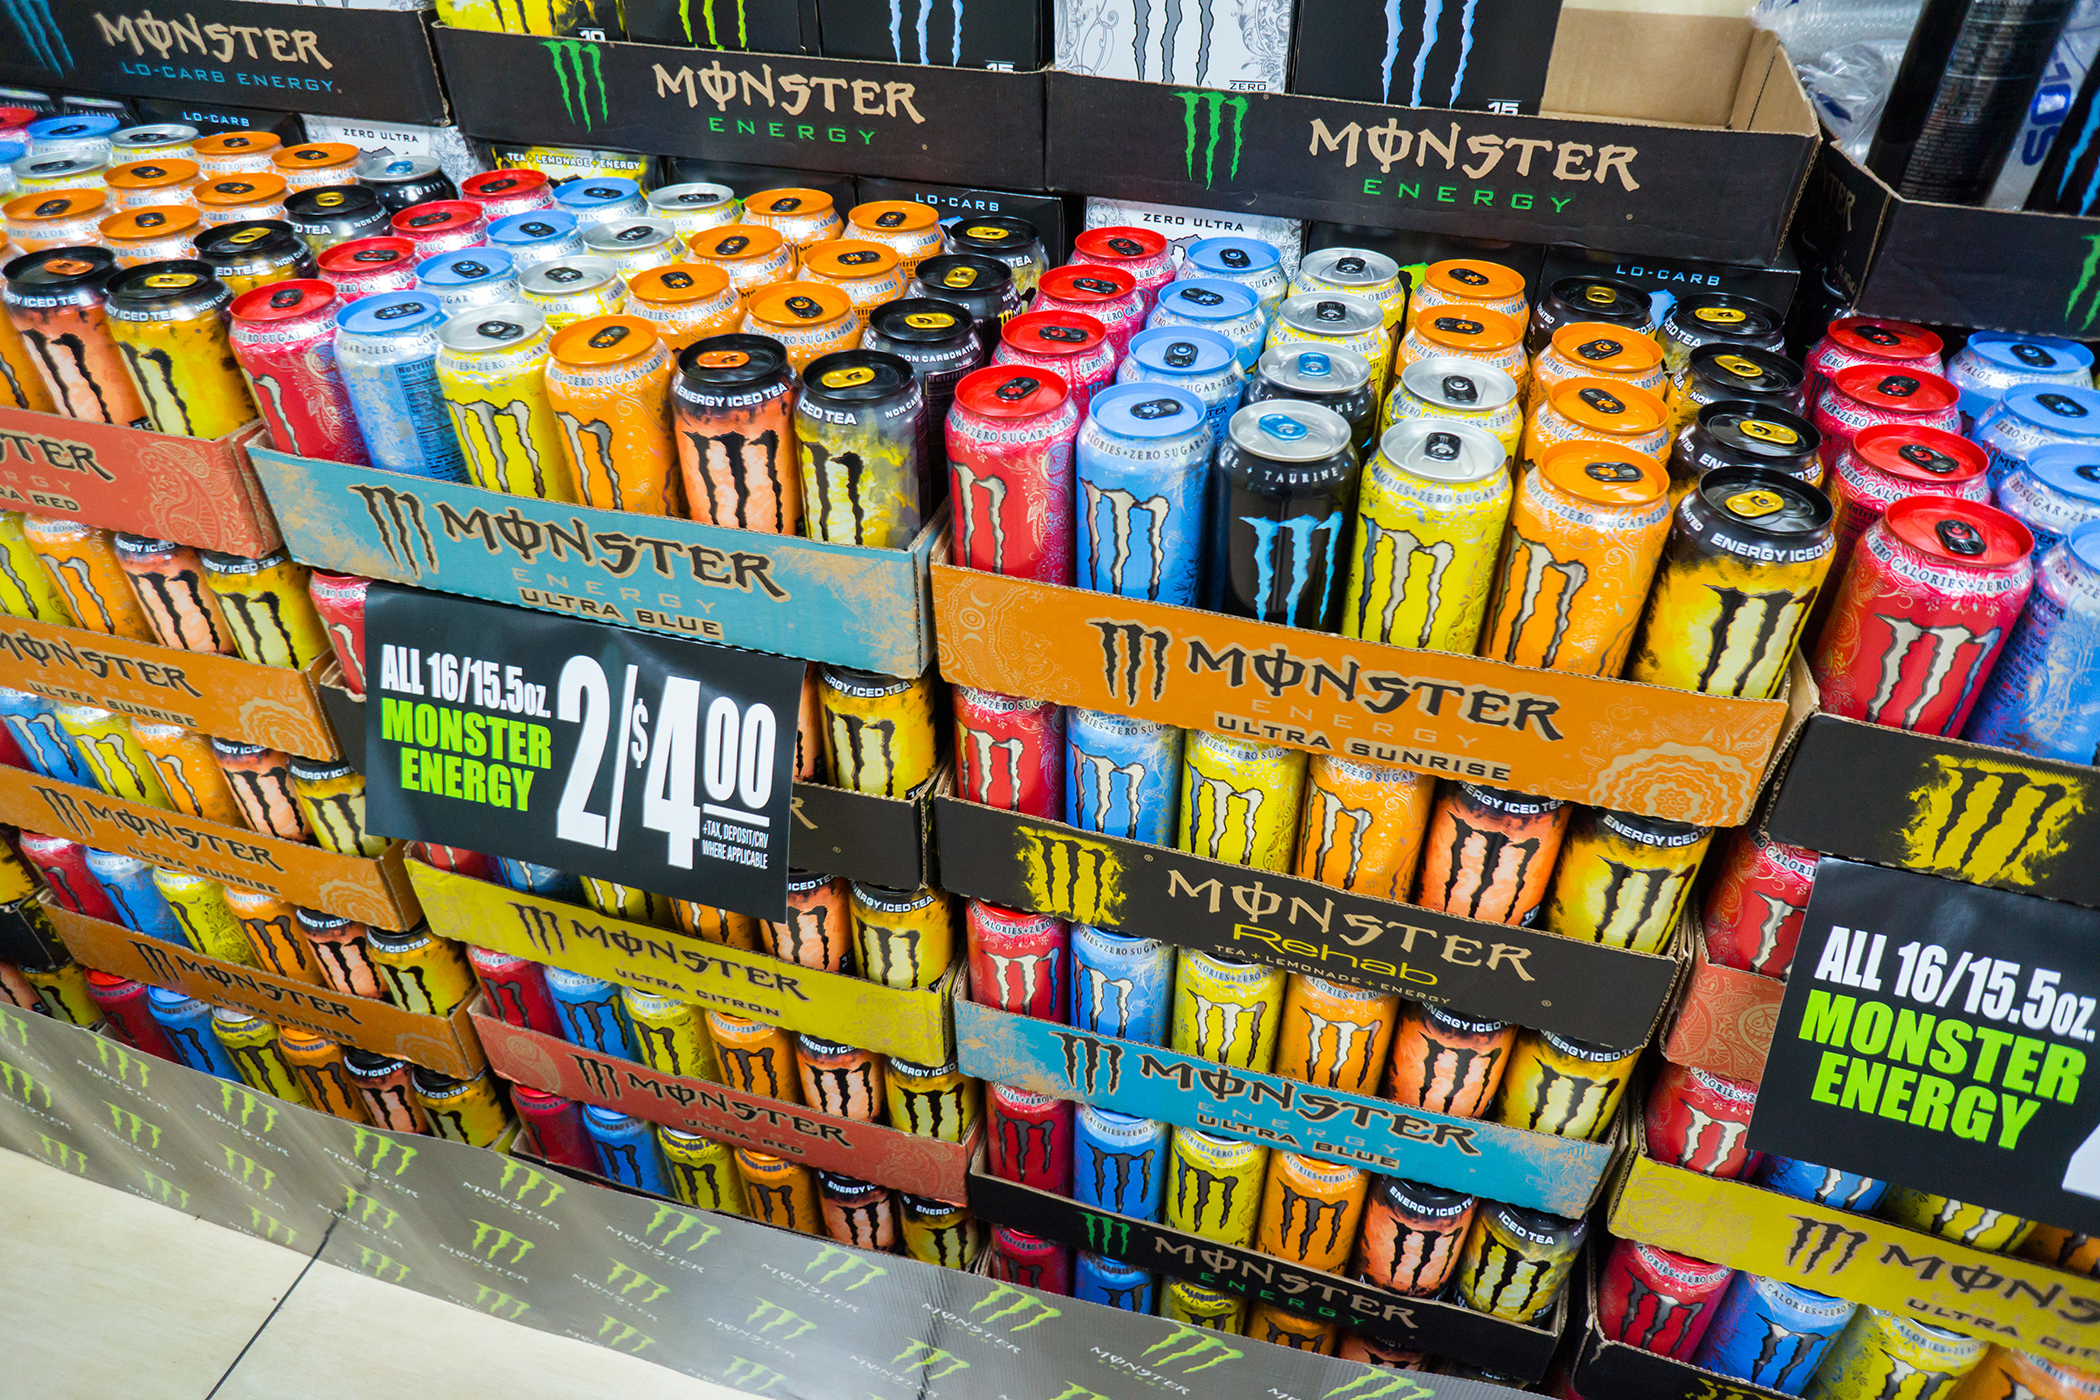 Monster brand energy drinks on sale in a convenience store in New York